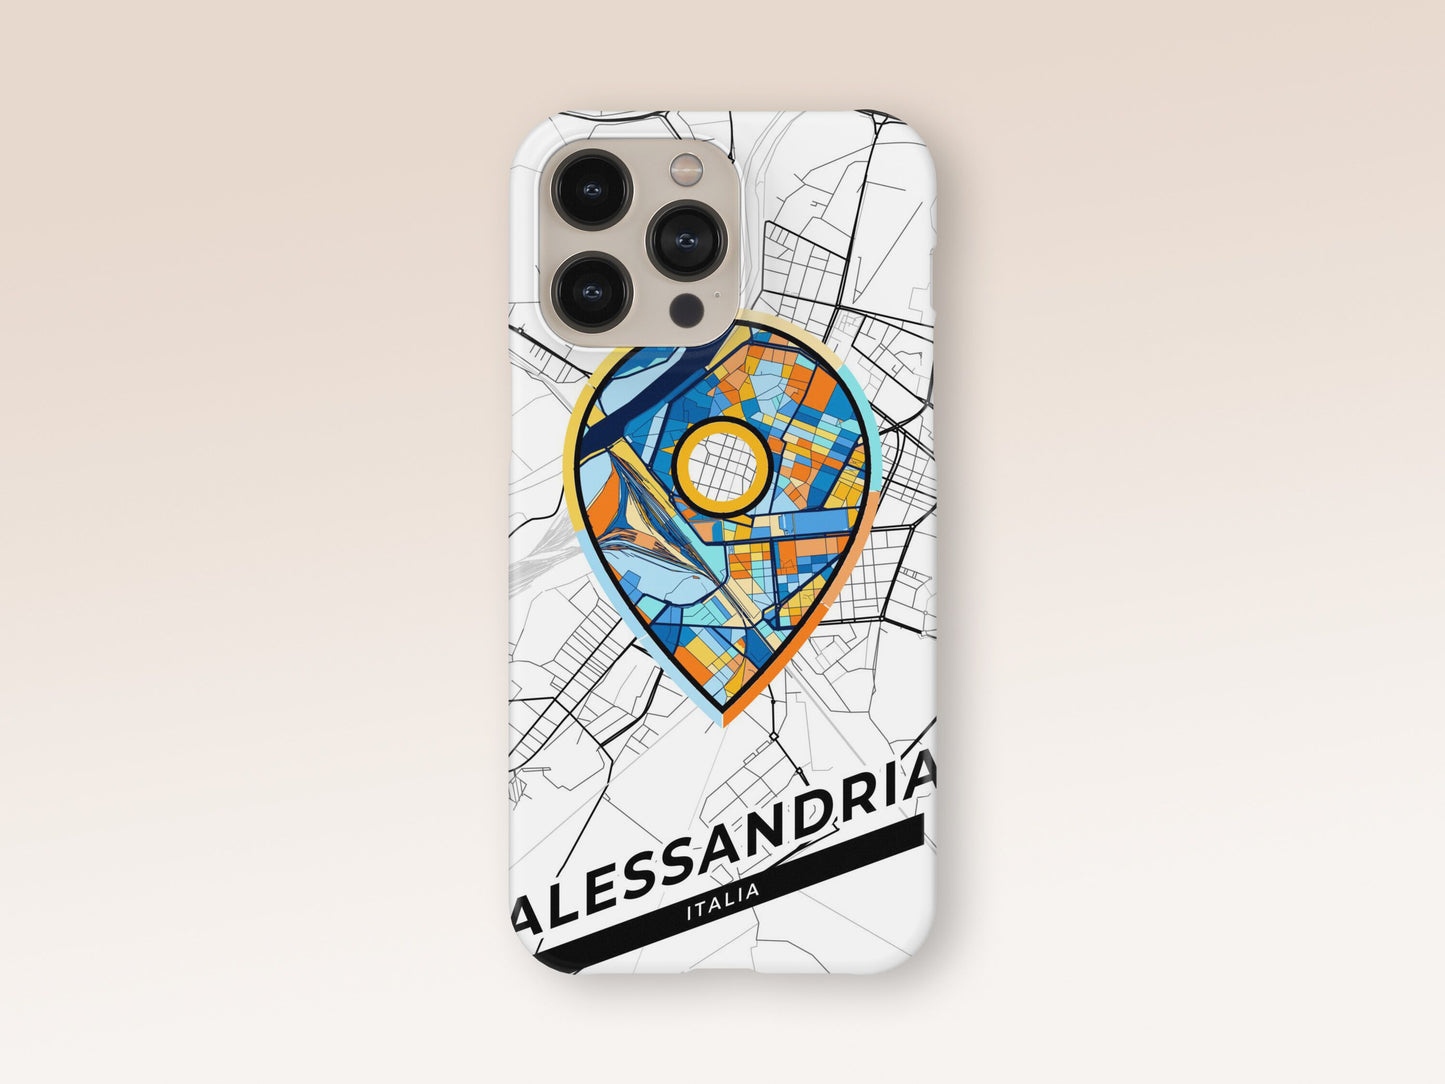 Alessandria Italy slim phone case with colorful icon. Birthday, wedding or housewarming gift. Couple match cases. 1